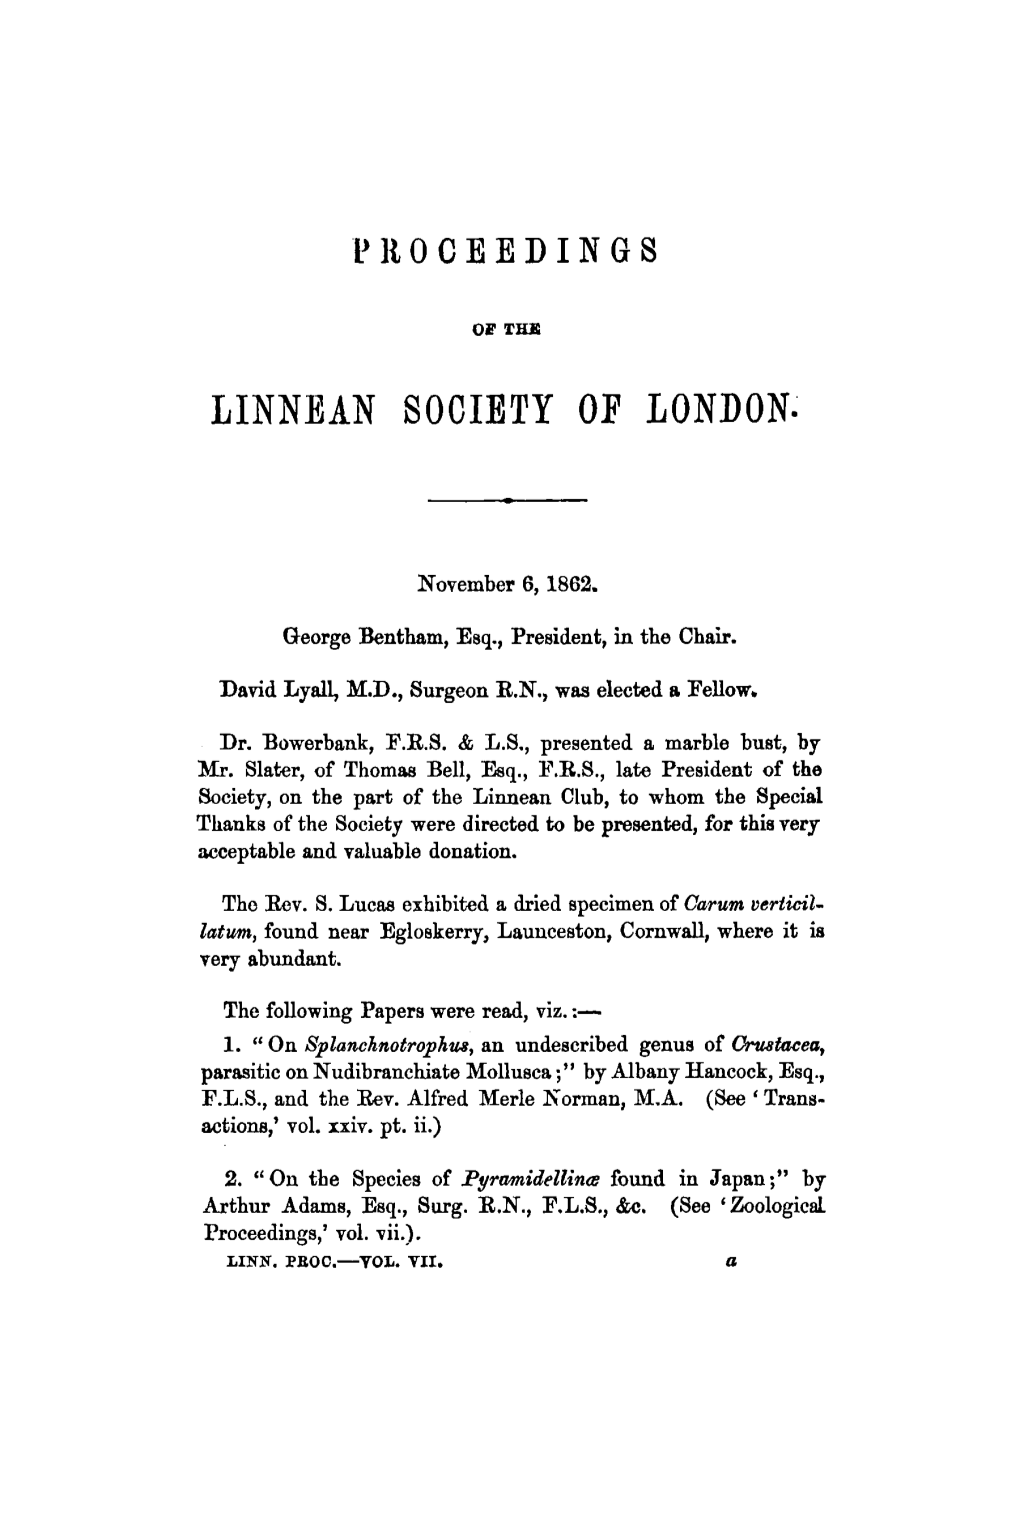 Proceedings of the Linnean Society of London. November 6, 1862, to April